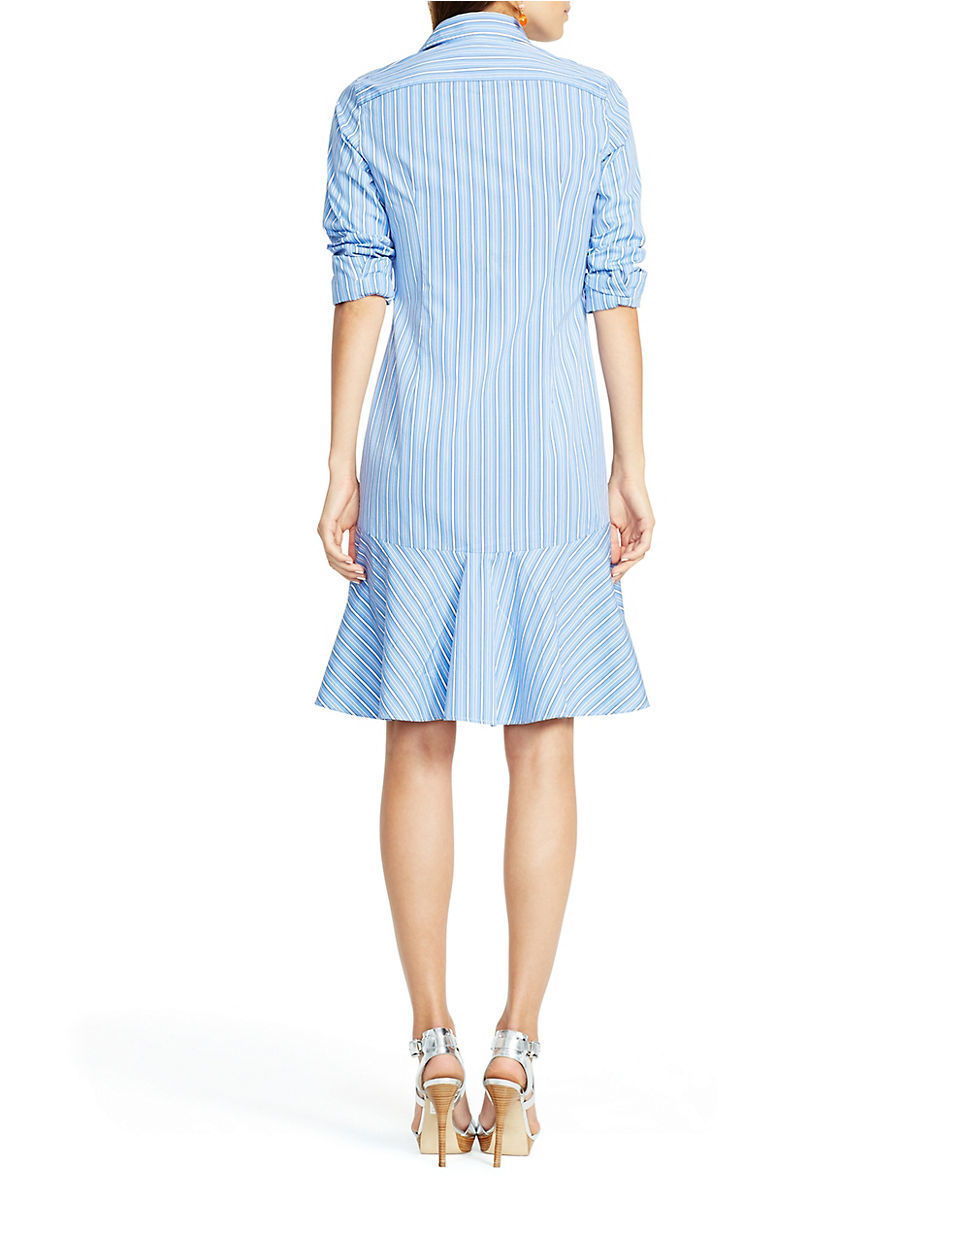 Polo Ralph Lauren Cotton Striped Broadcloth Shirtdress in Blue - Lyst